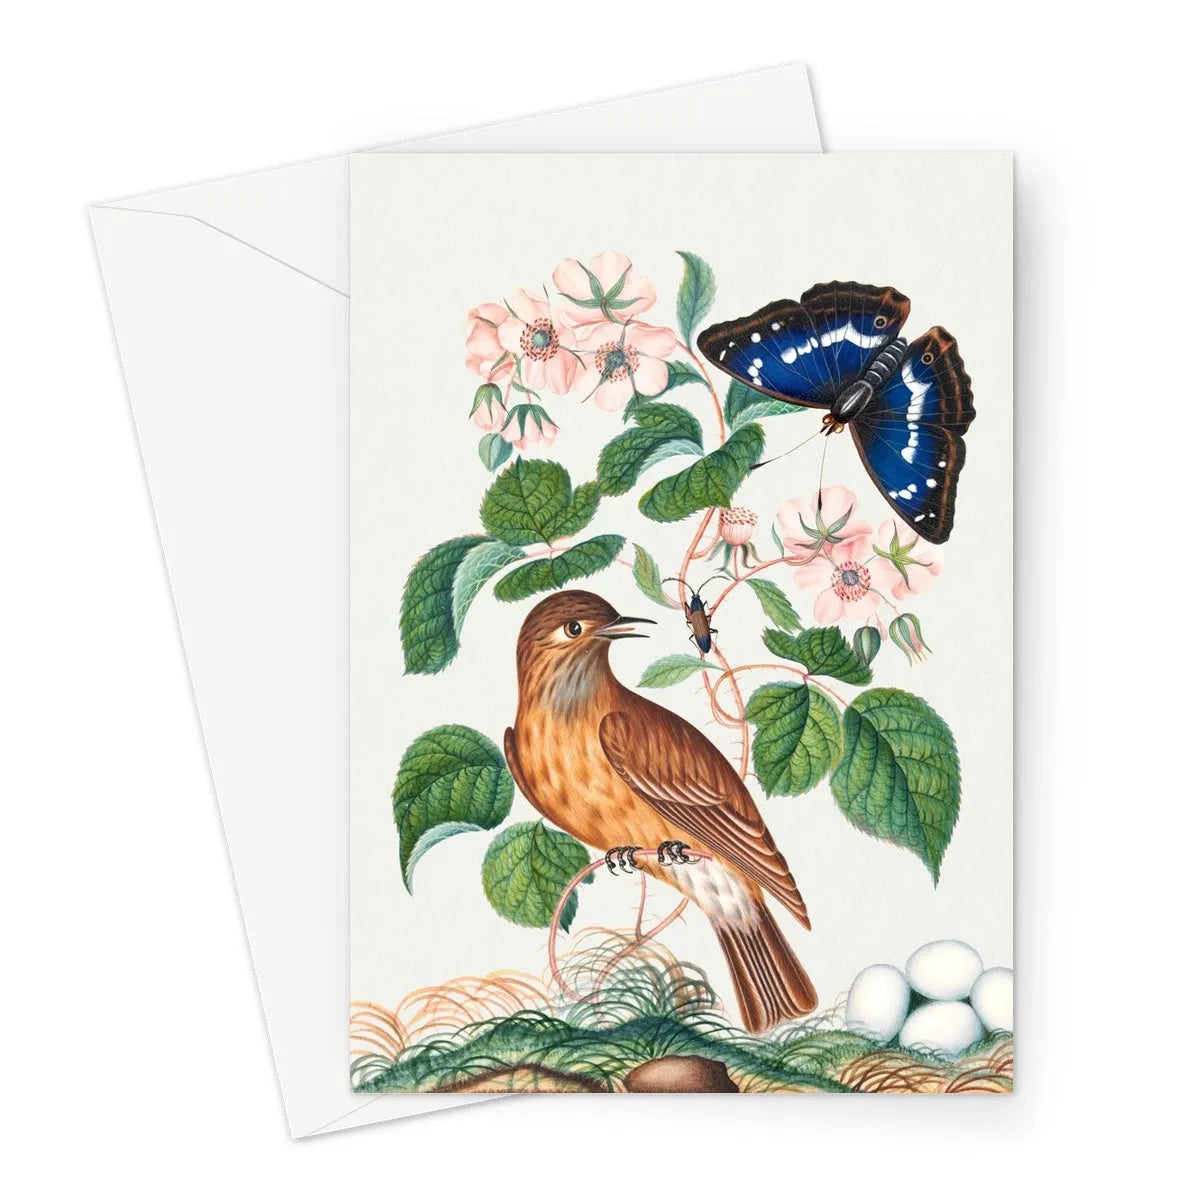 Spotted Flycatcher Purple Emperor And Longhorned Beetle By James Bolton Greeting Card - A5 Portrait / 1 Card